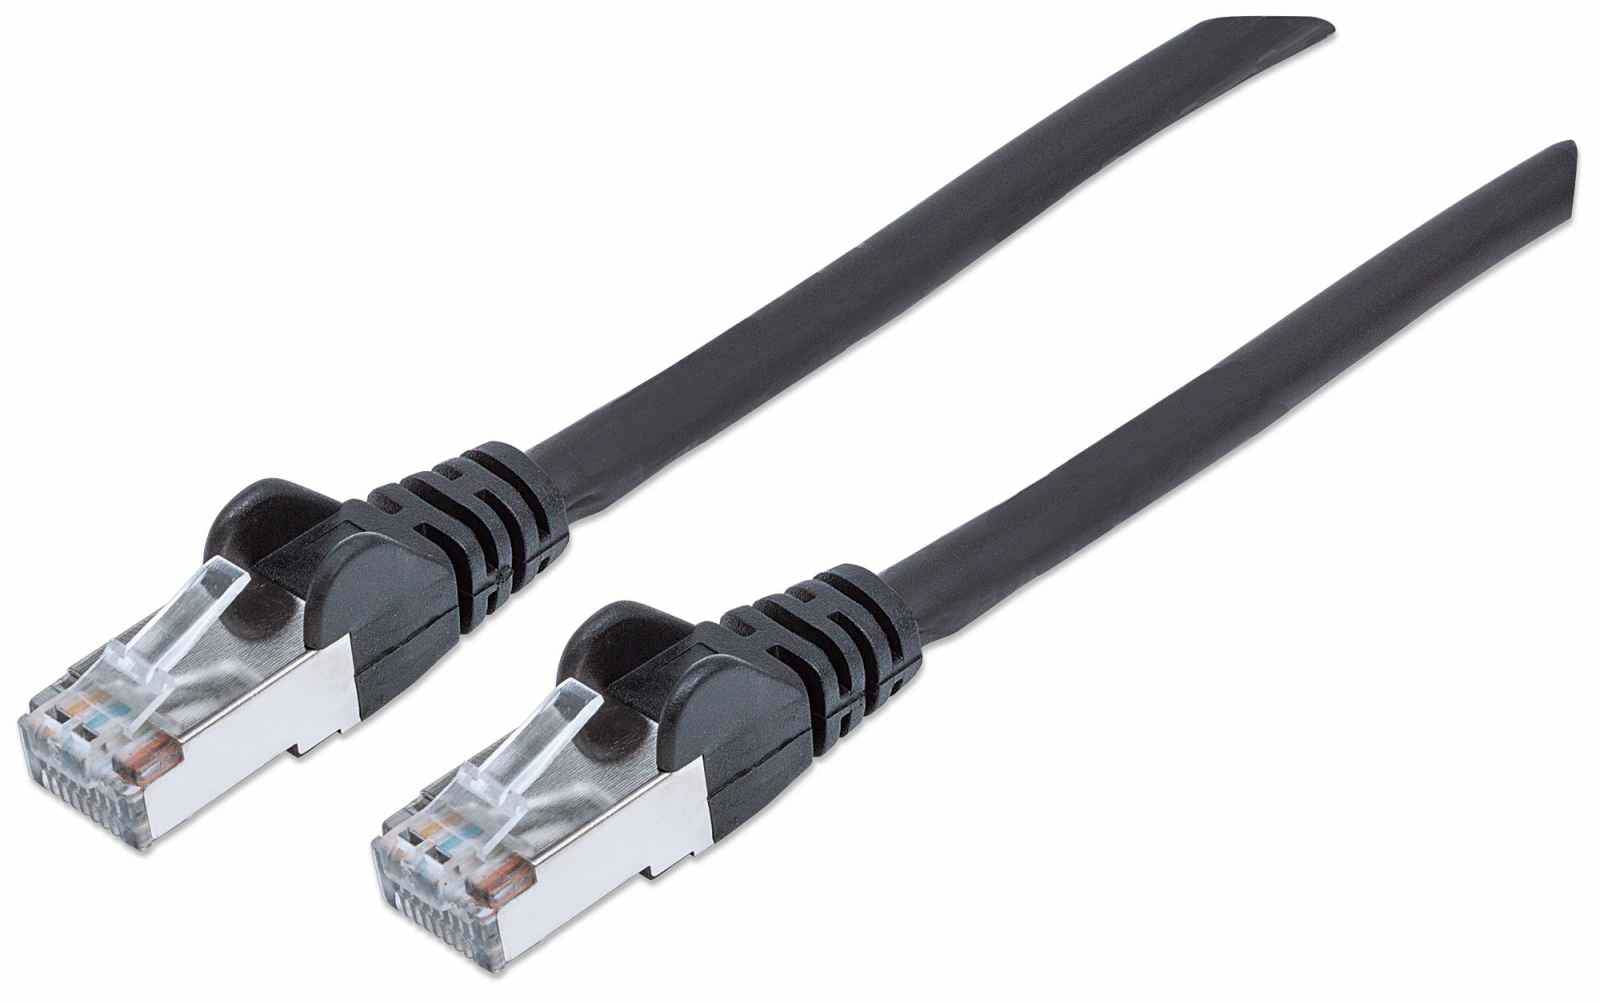 Intellinet Network Patch Cable, Cat7 Cable/Cat6A Plugs, 0.25m, Black, Copper, S/FTP, LSOH / LSZH, PVC, RJ45, Gold Plated Contacts, Snagless, Booted, Lifetime Warranty, Polybag